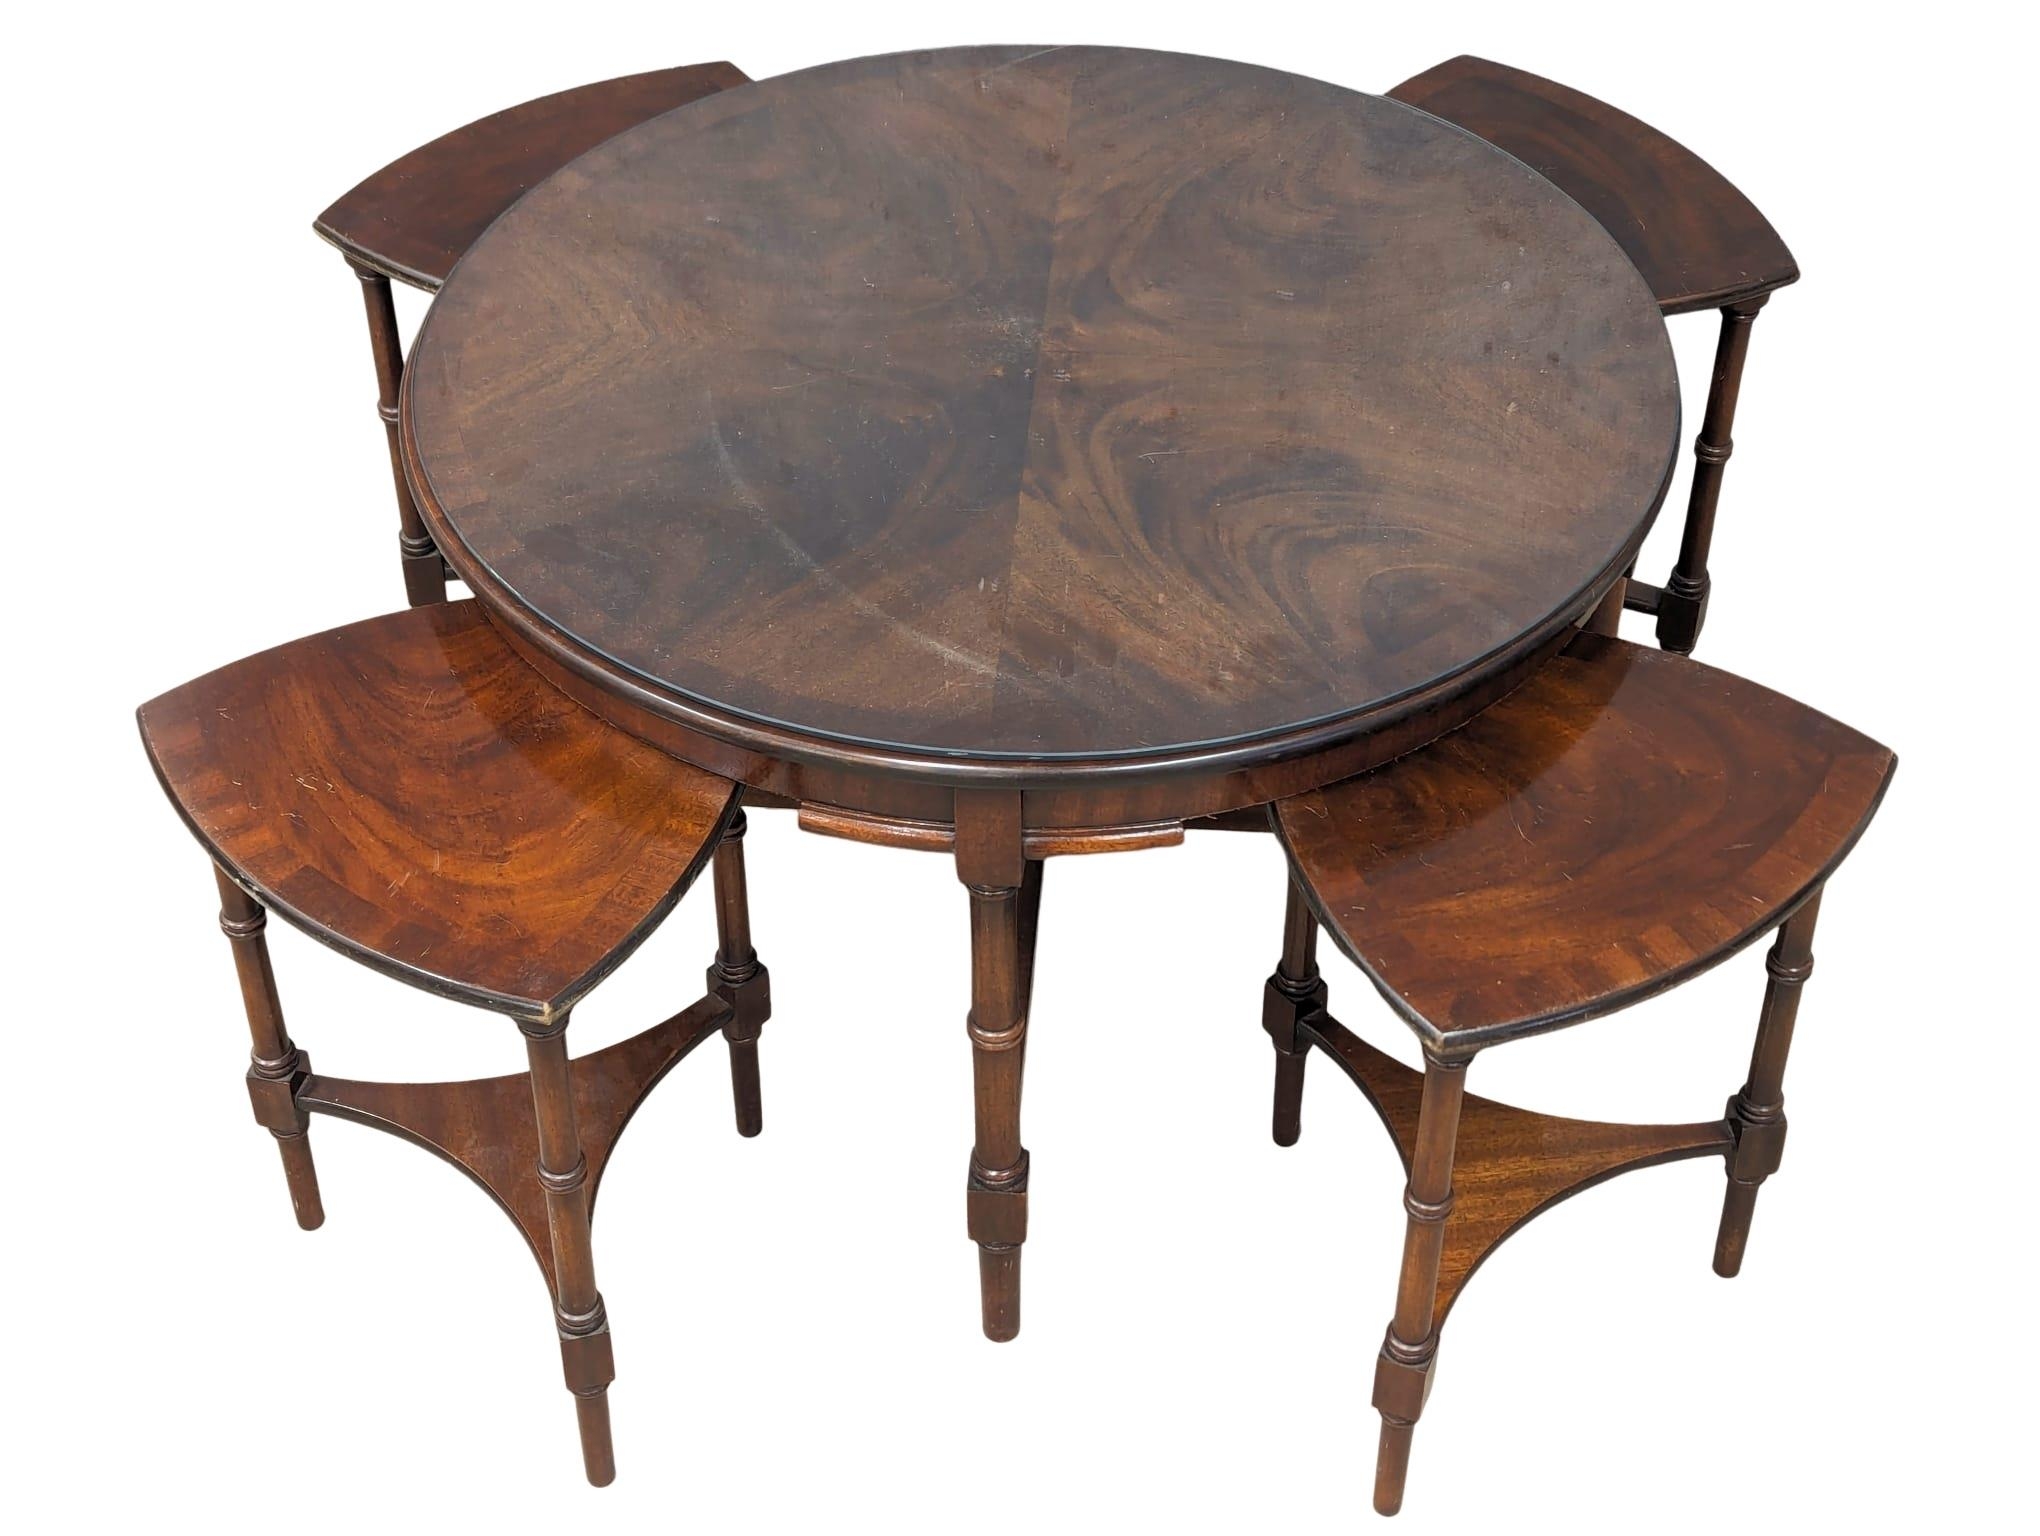 A mahogany coffee table with 4 nesting tables. 76x49cm - Image 6 of 7